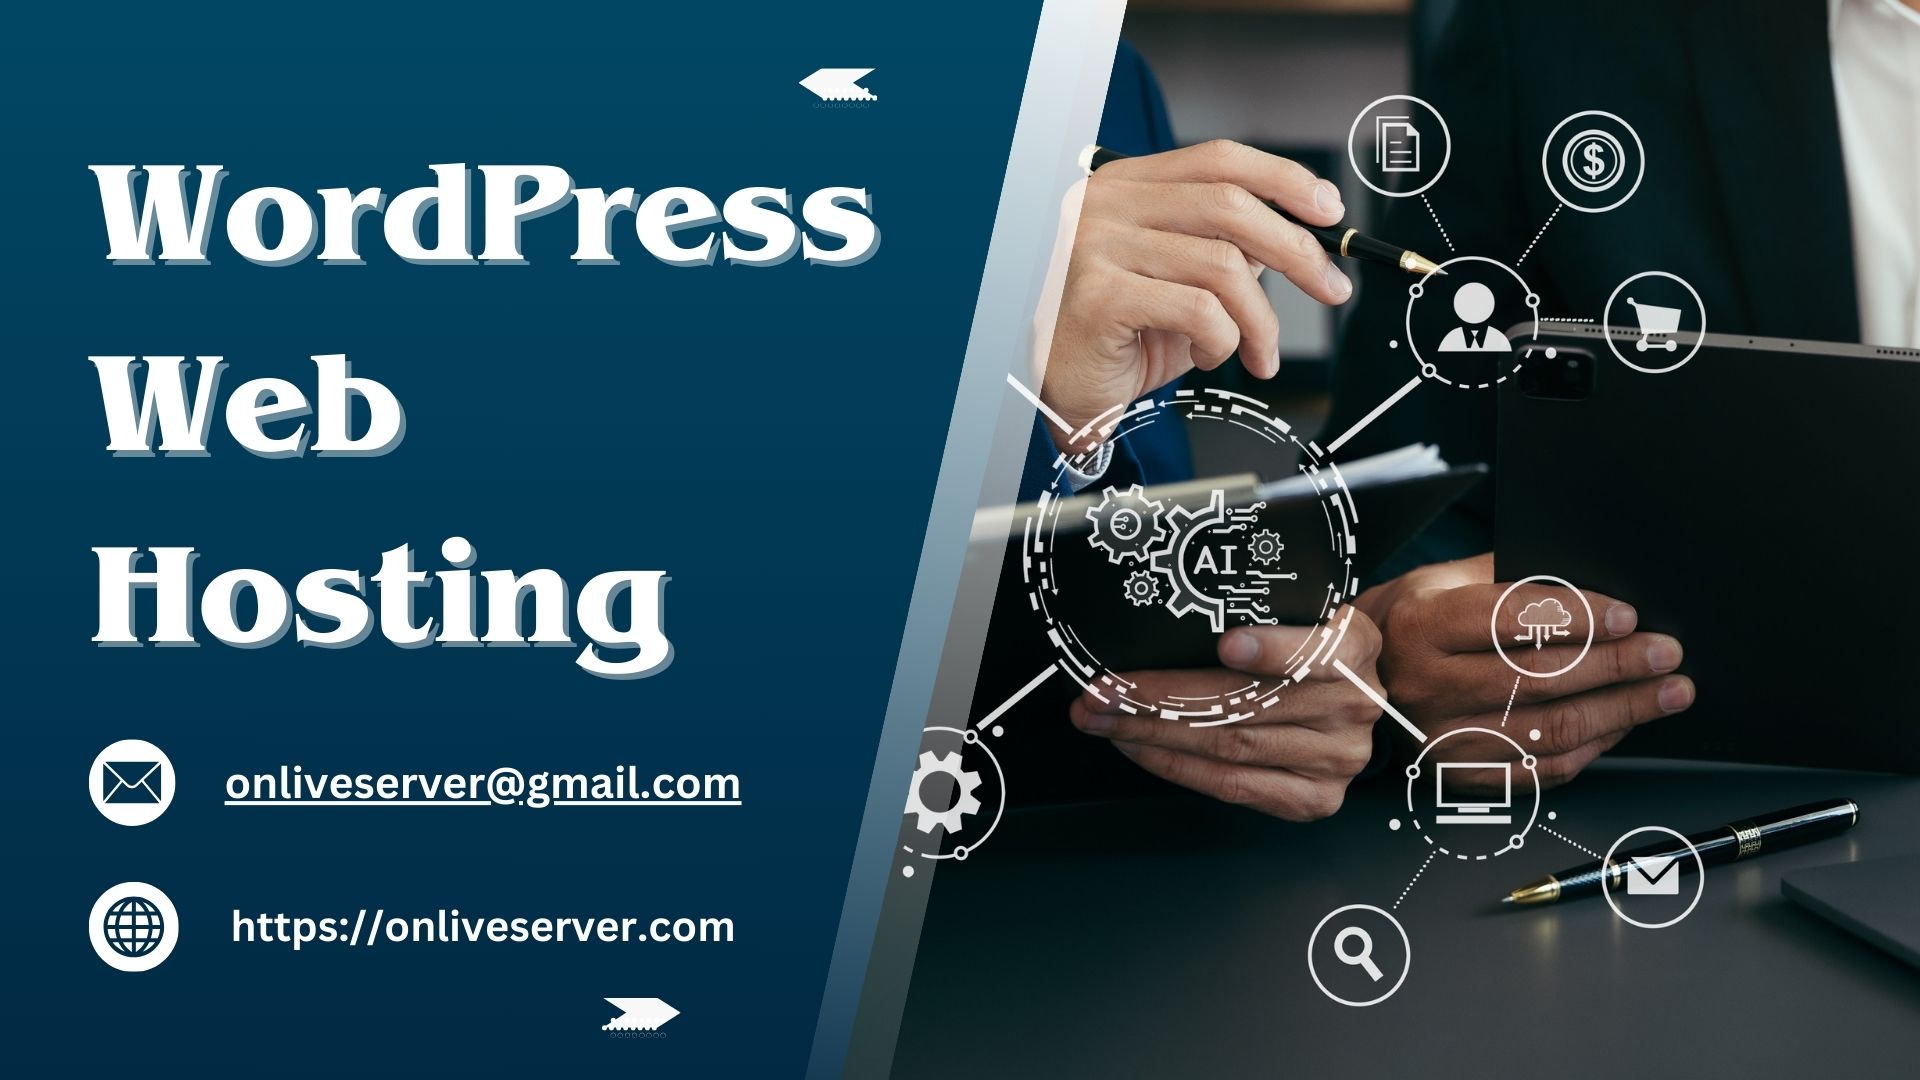 A Complete Guide to the Best WordPress Web Hosting